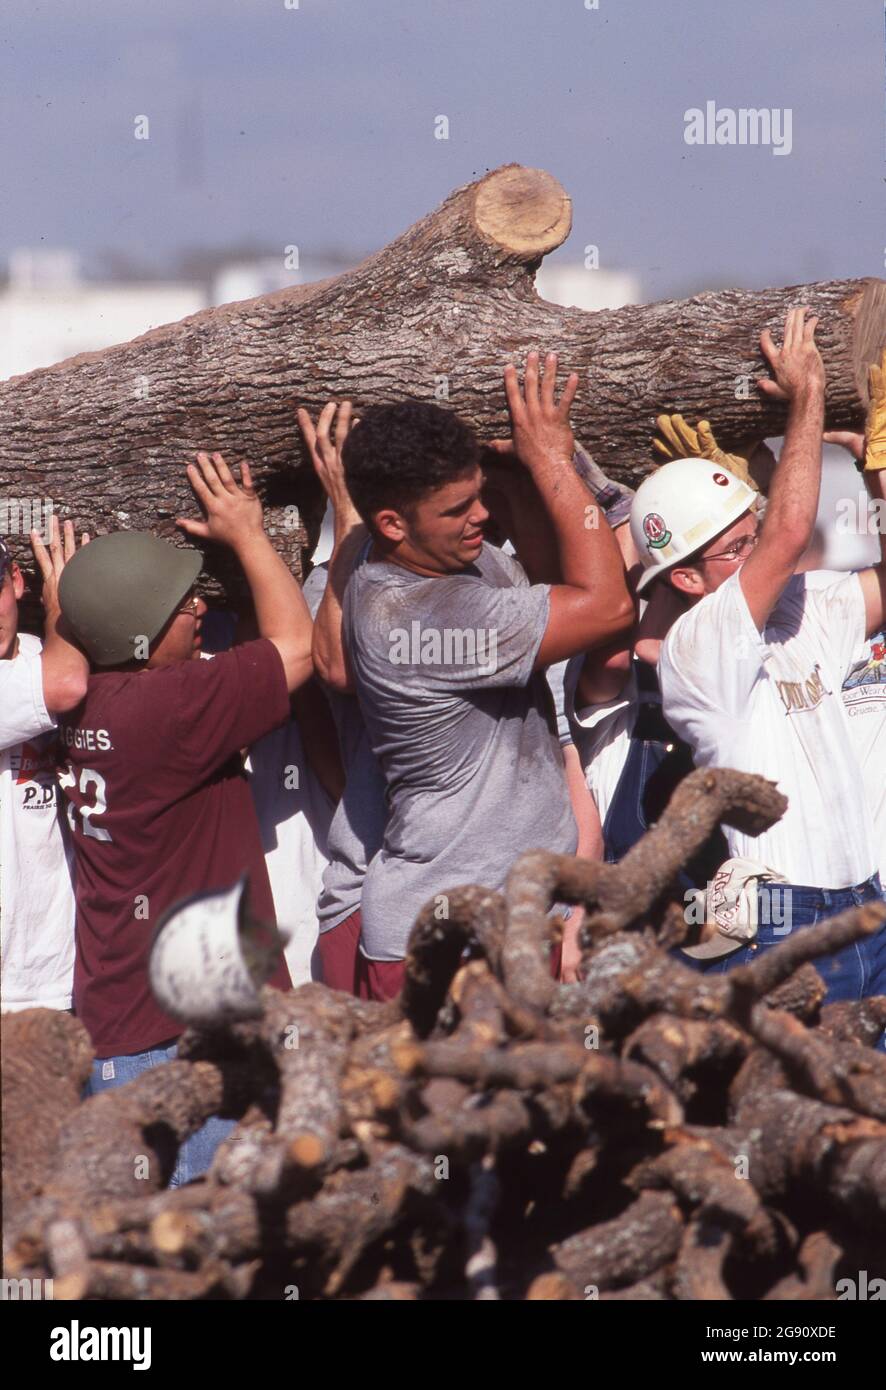 College Station Texas USA, November  18 1999: Students and other volunteers remove logs from the huge piles of timber just hours after the Aggie Bonfire collapse that killed 12 people building the stacks. Bonfire is a student-led ritual at the campus that has been part of school spirit activities leading up to the annual Texas-Texas A&M football game for decades. ©Bob Daemmrich Stock Photo